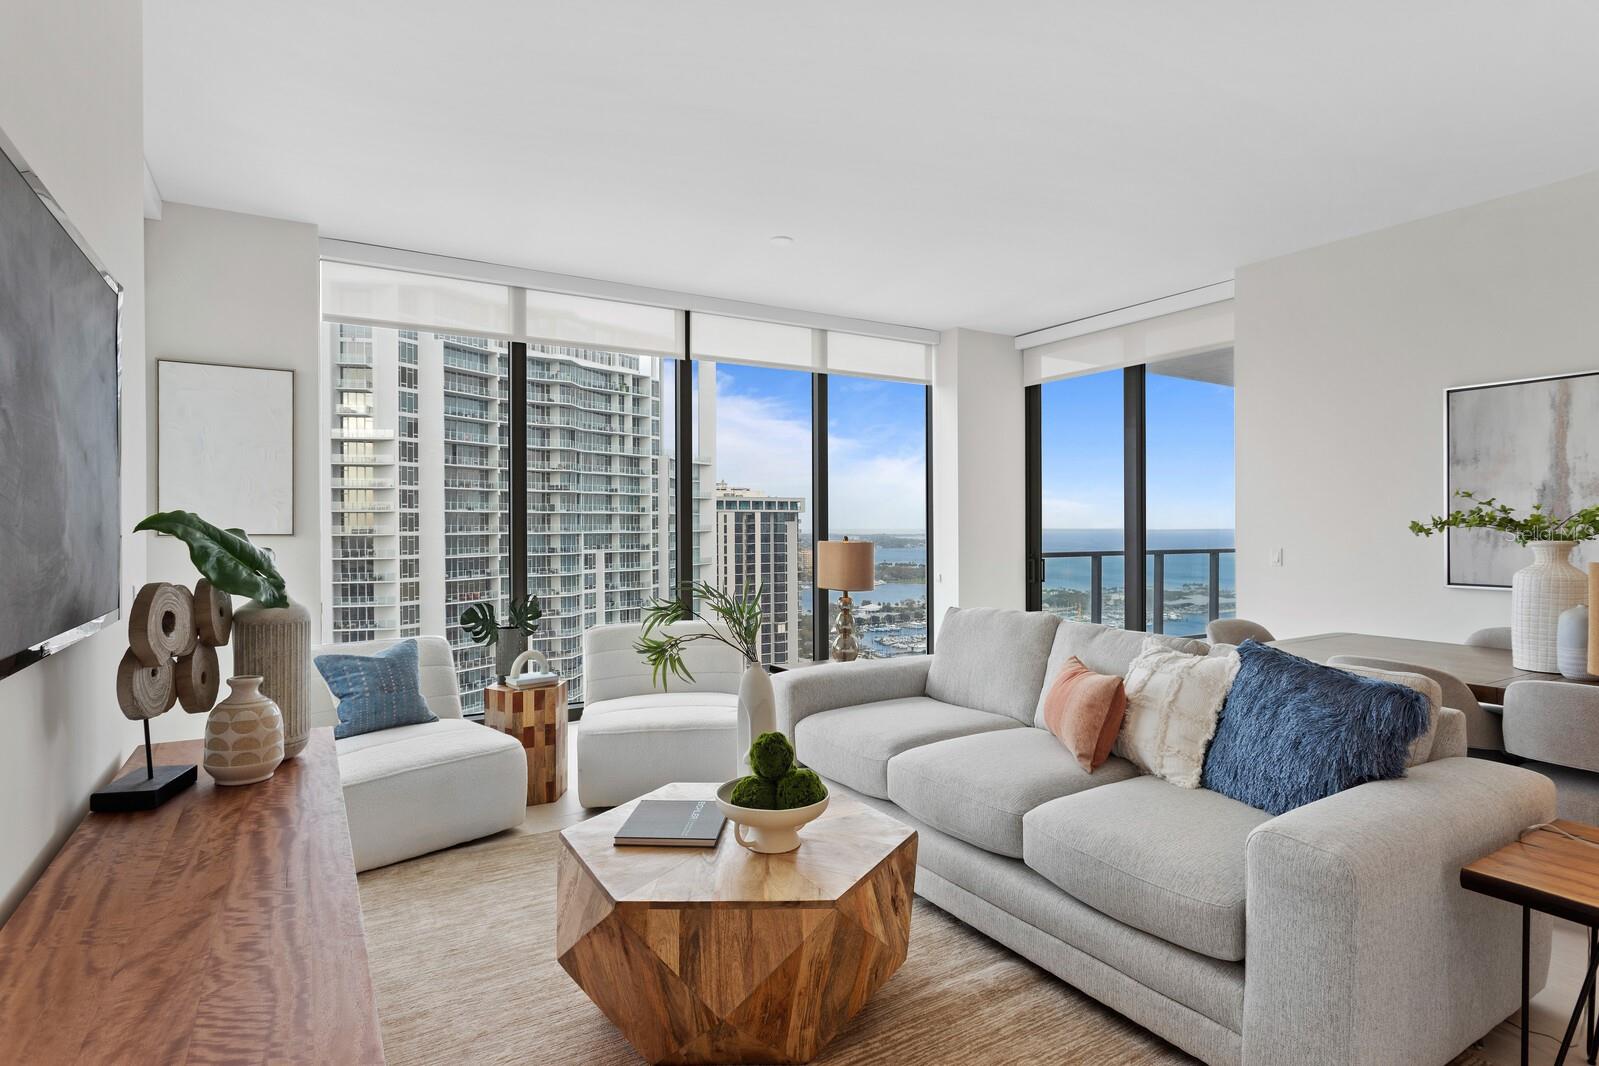 Gorgeous living area with floor to ceiling views of downtown, Tampa Bay and surrounding